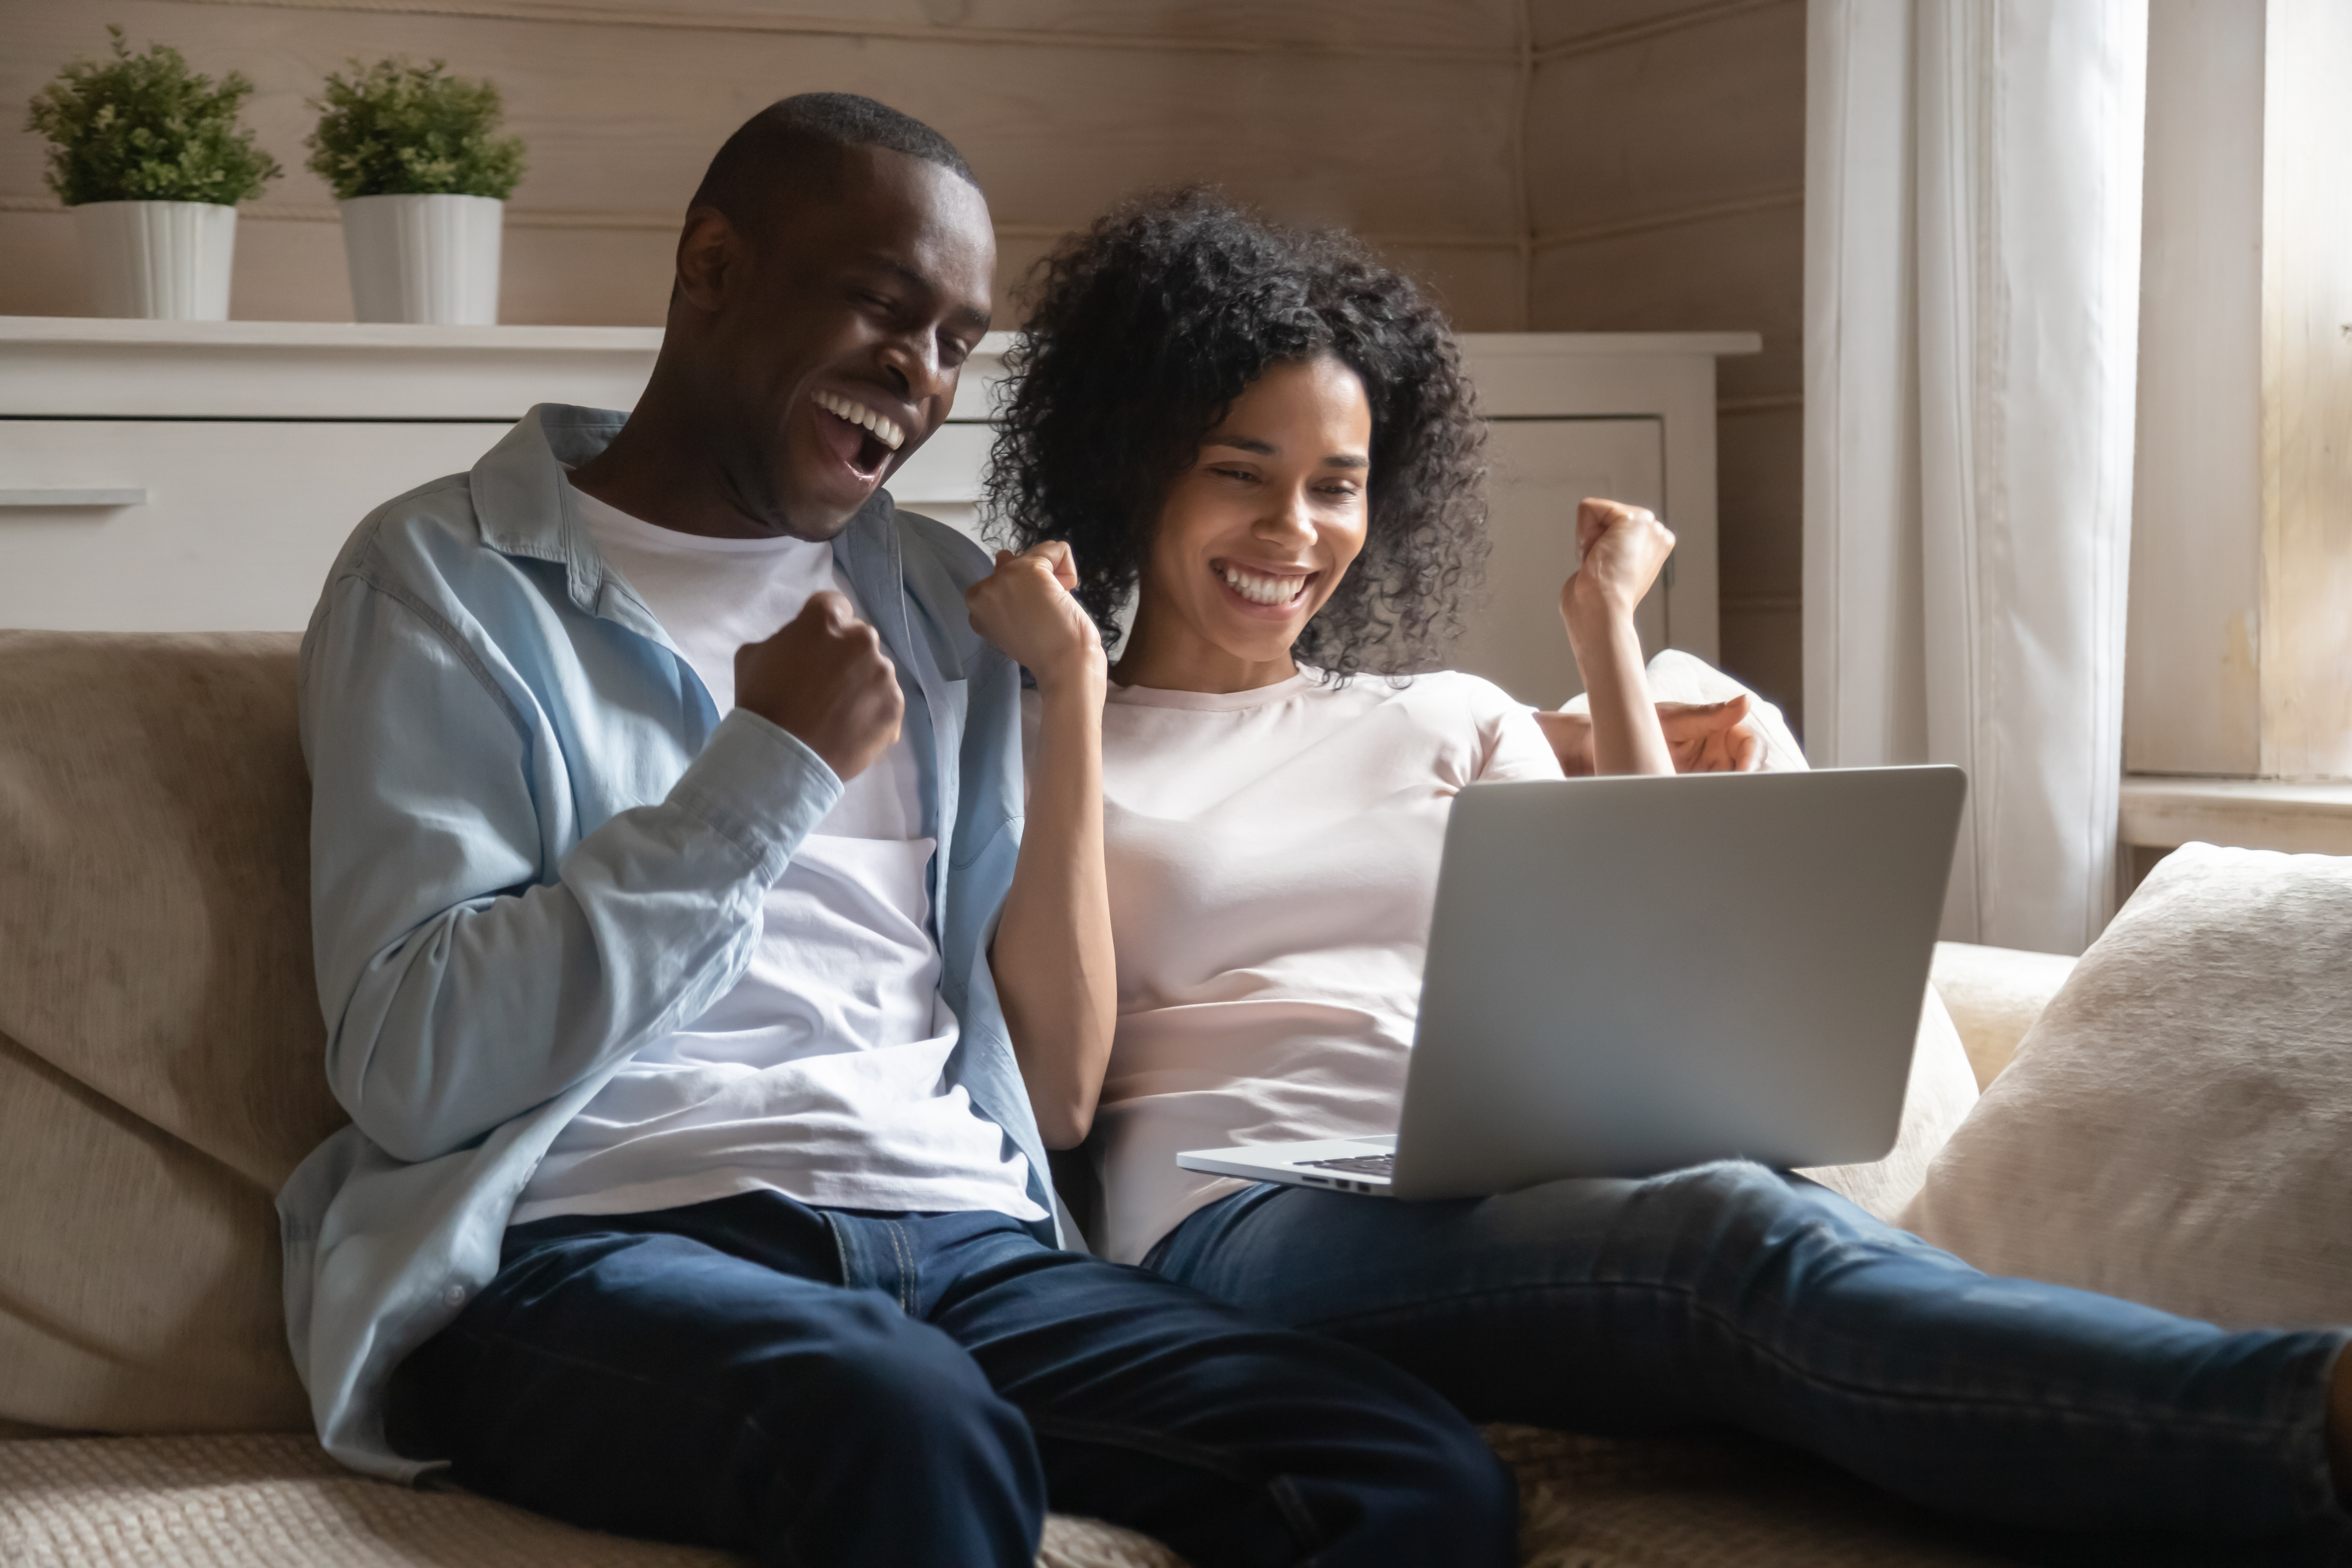 Man and woman sitting on couch looking at the computer and smiling